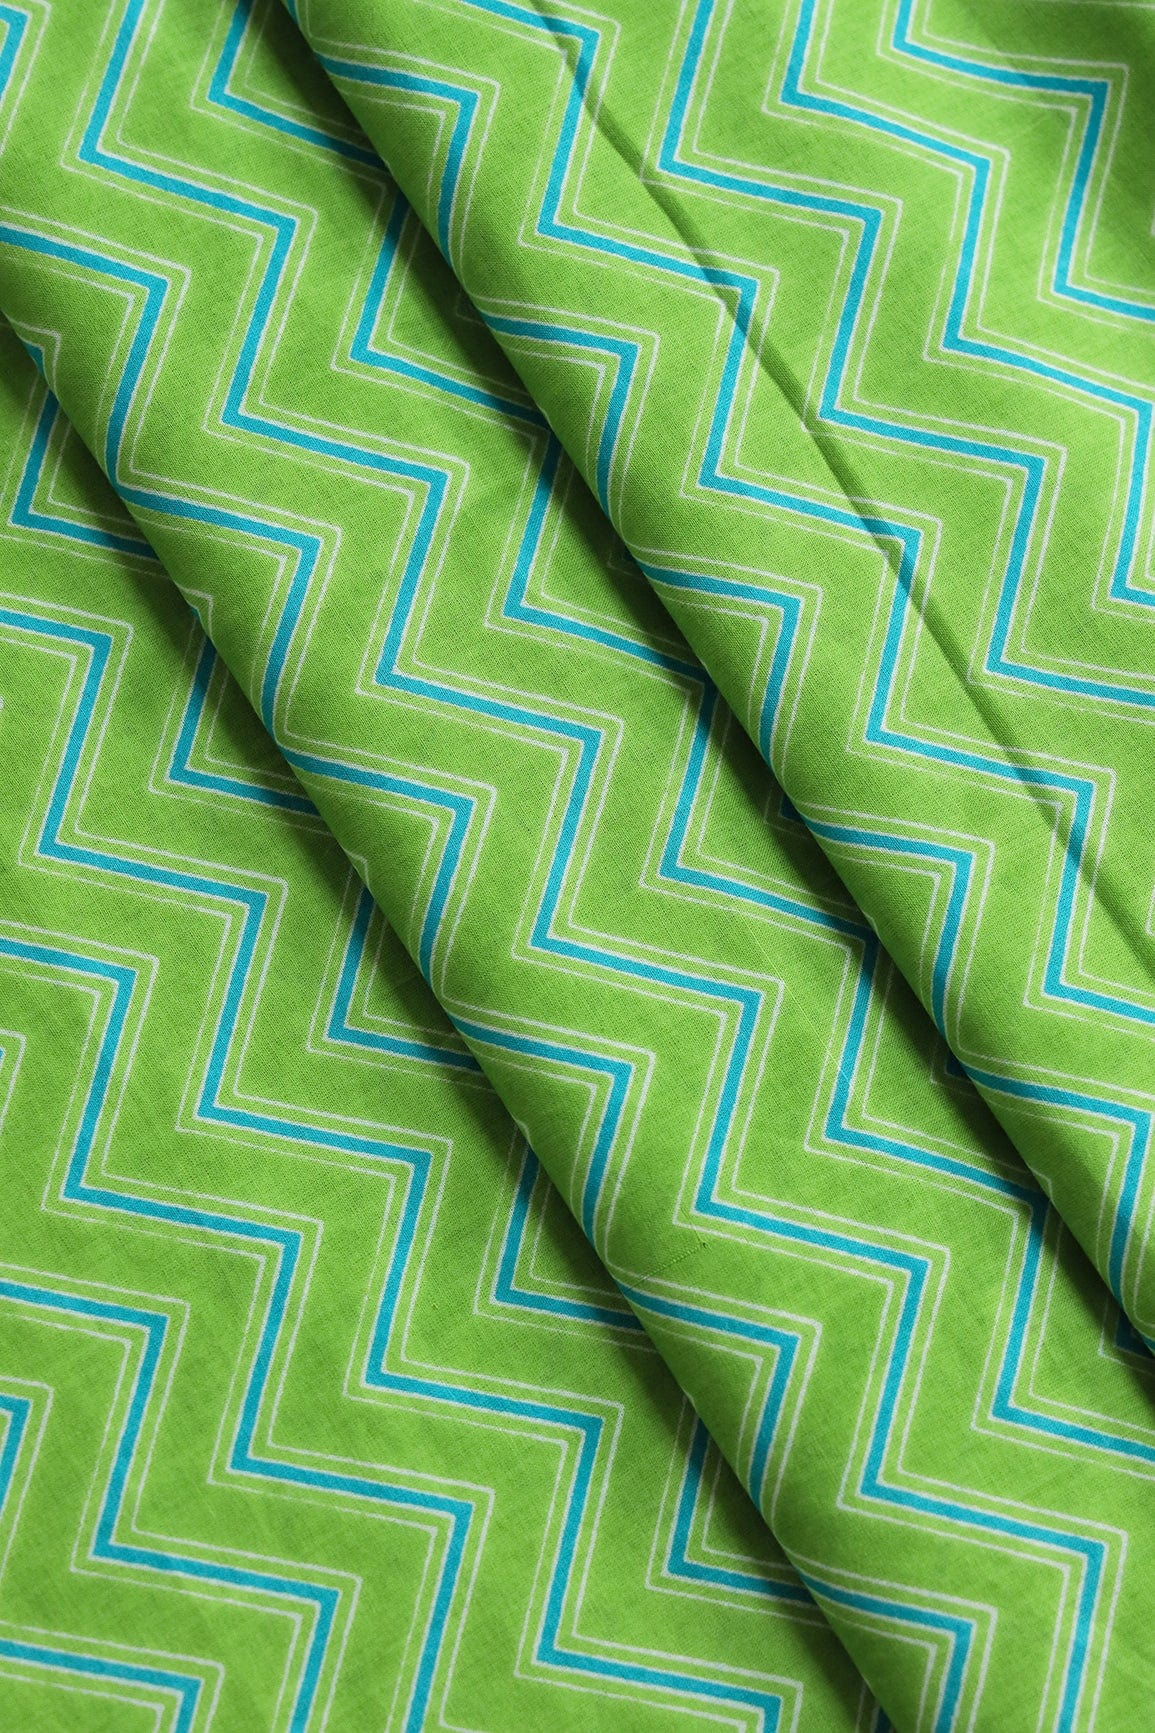 doeraa Prints Parrot Green And Turquoise Chevron Print On Pure Mul Cotton Fabric